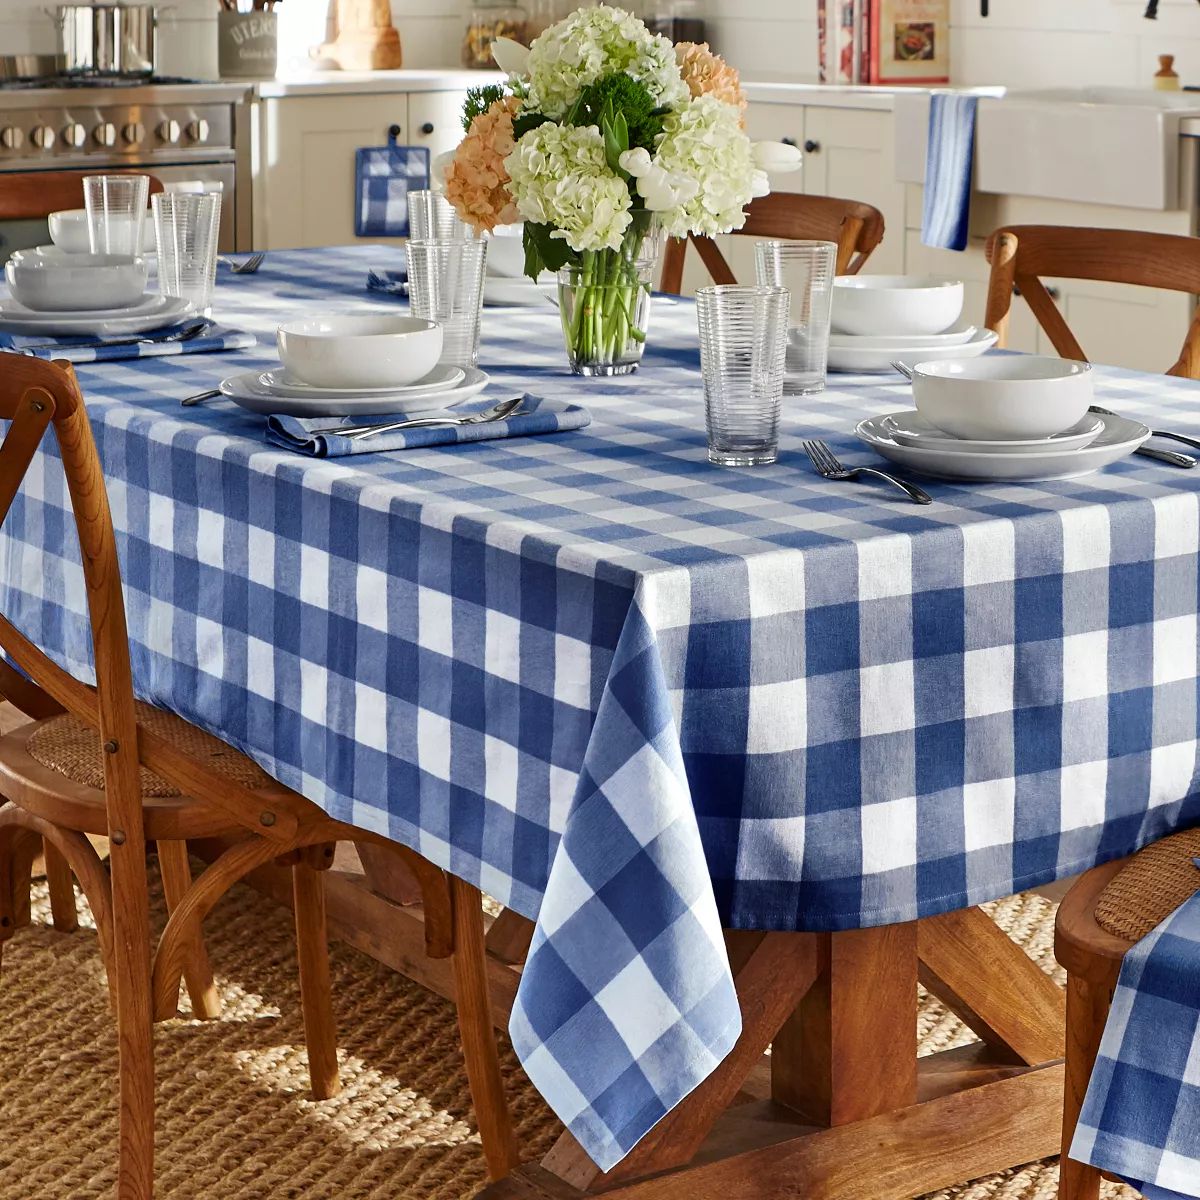 Farmhouse Living Buffalo Check Tablecloth Collection - Elrene Home Fashions | Target